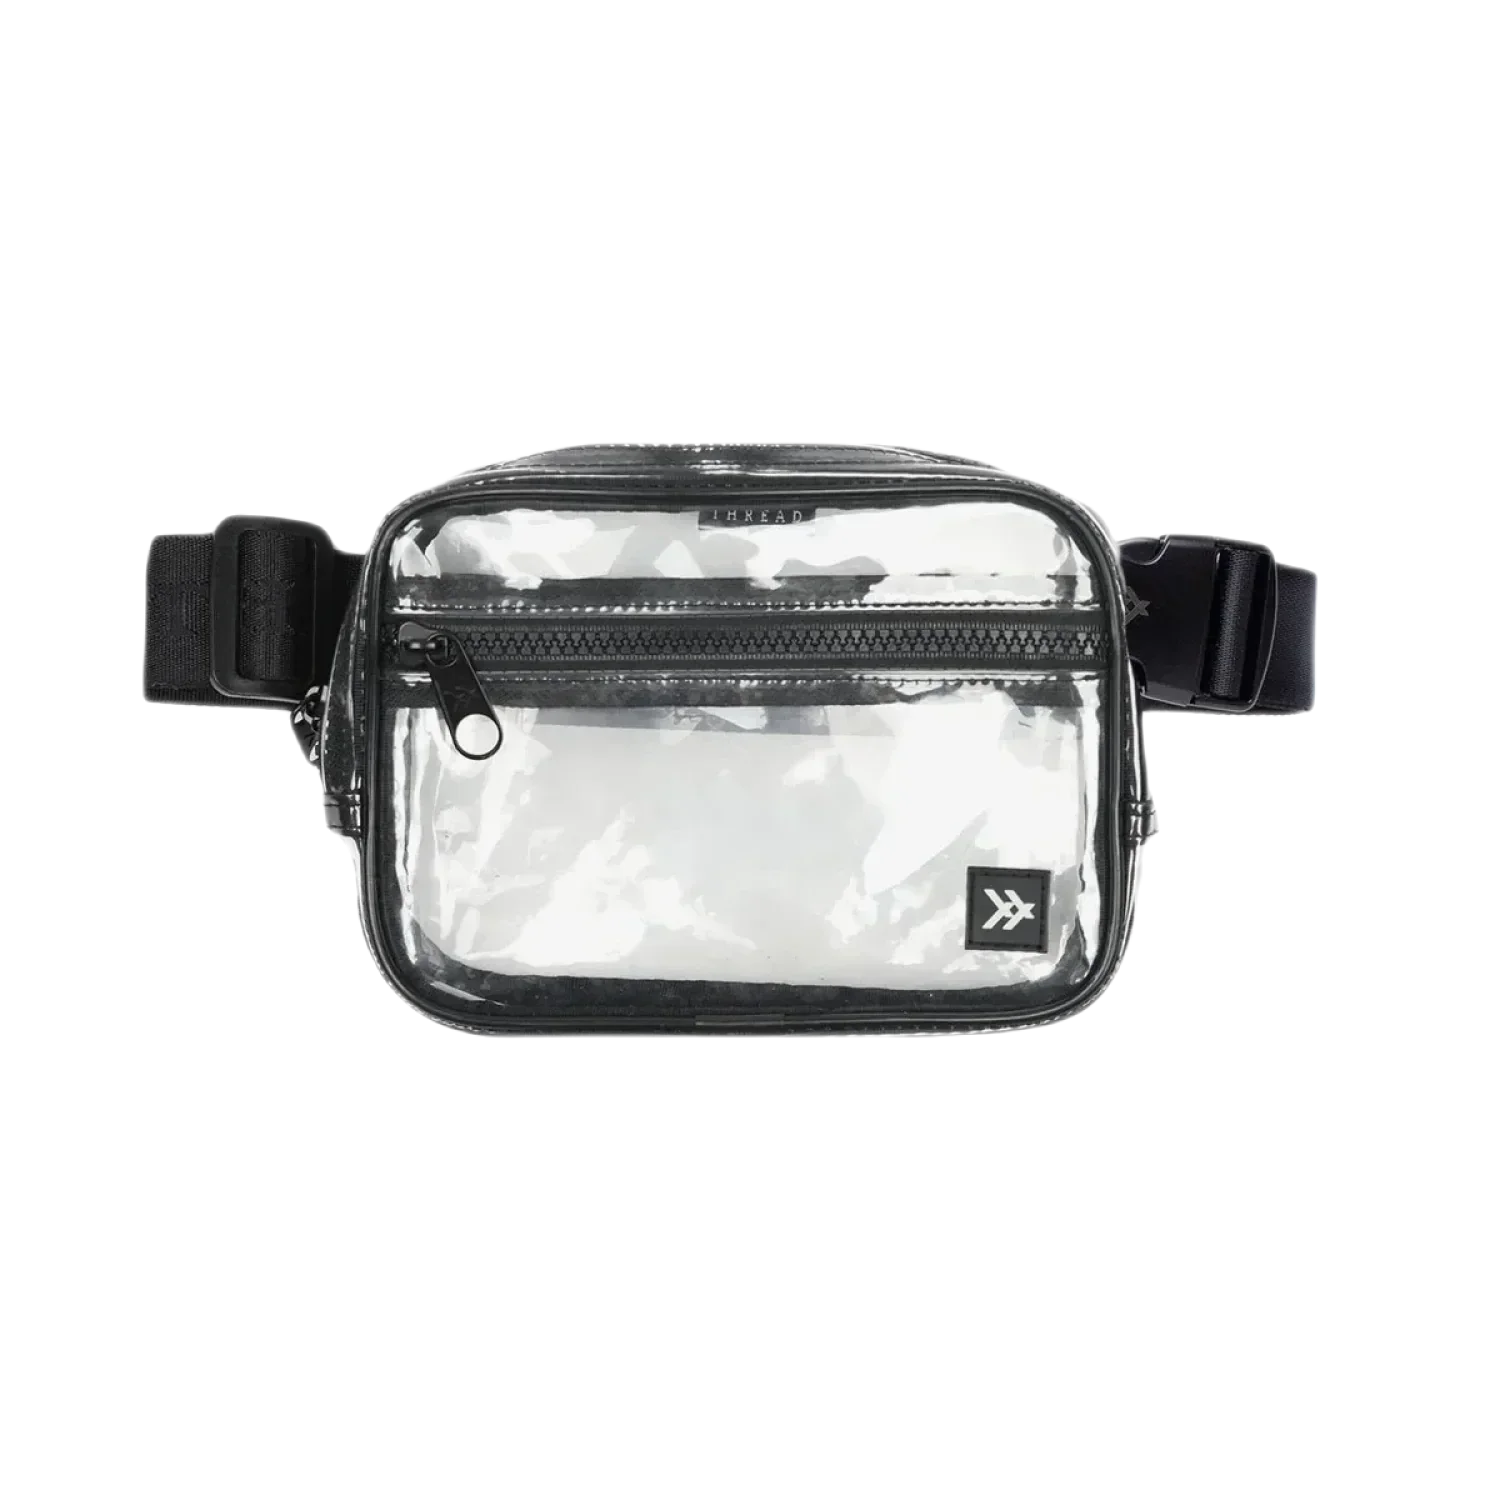 Thread PACKS|LUGGAGE - PACK|CASUAL - WAIST|SLING|MESSENGER|PURSE Fanny Pack CLEAR